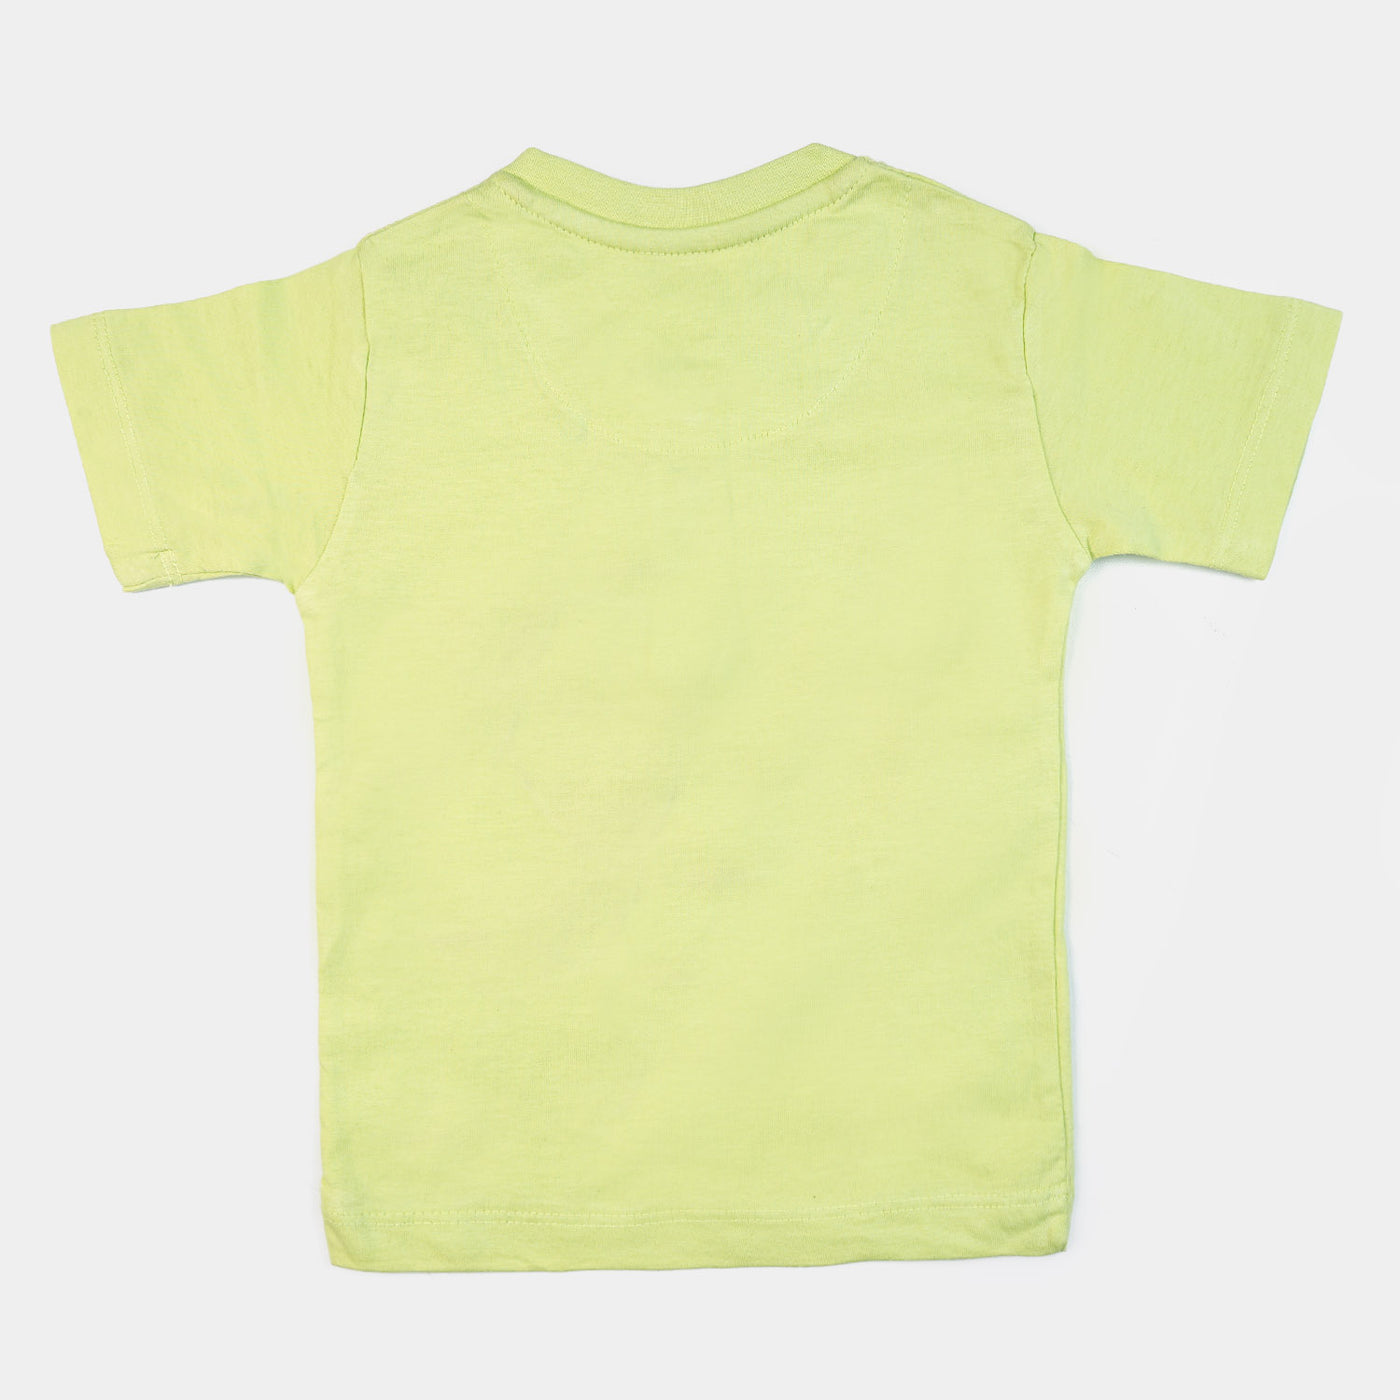 Infant Boys Cotton T-Shirt Fly - Green